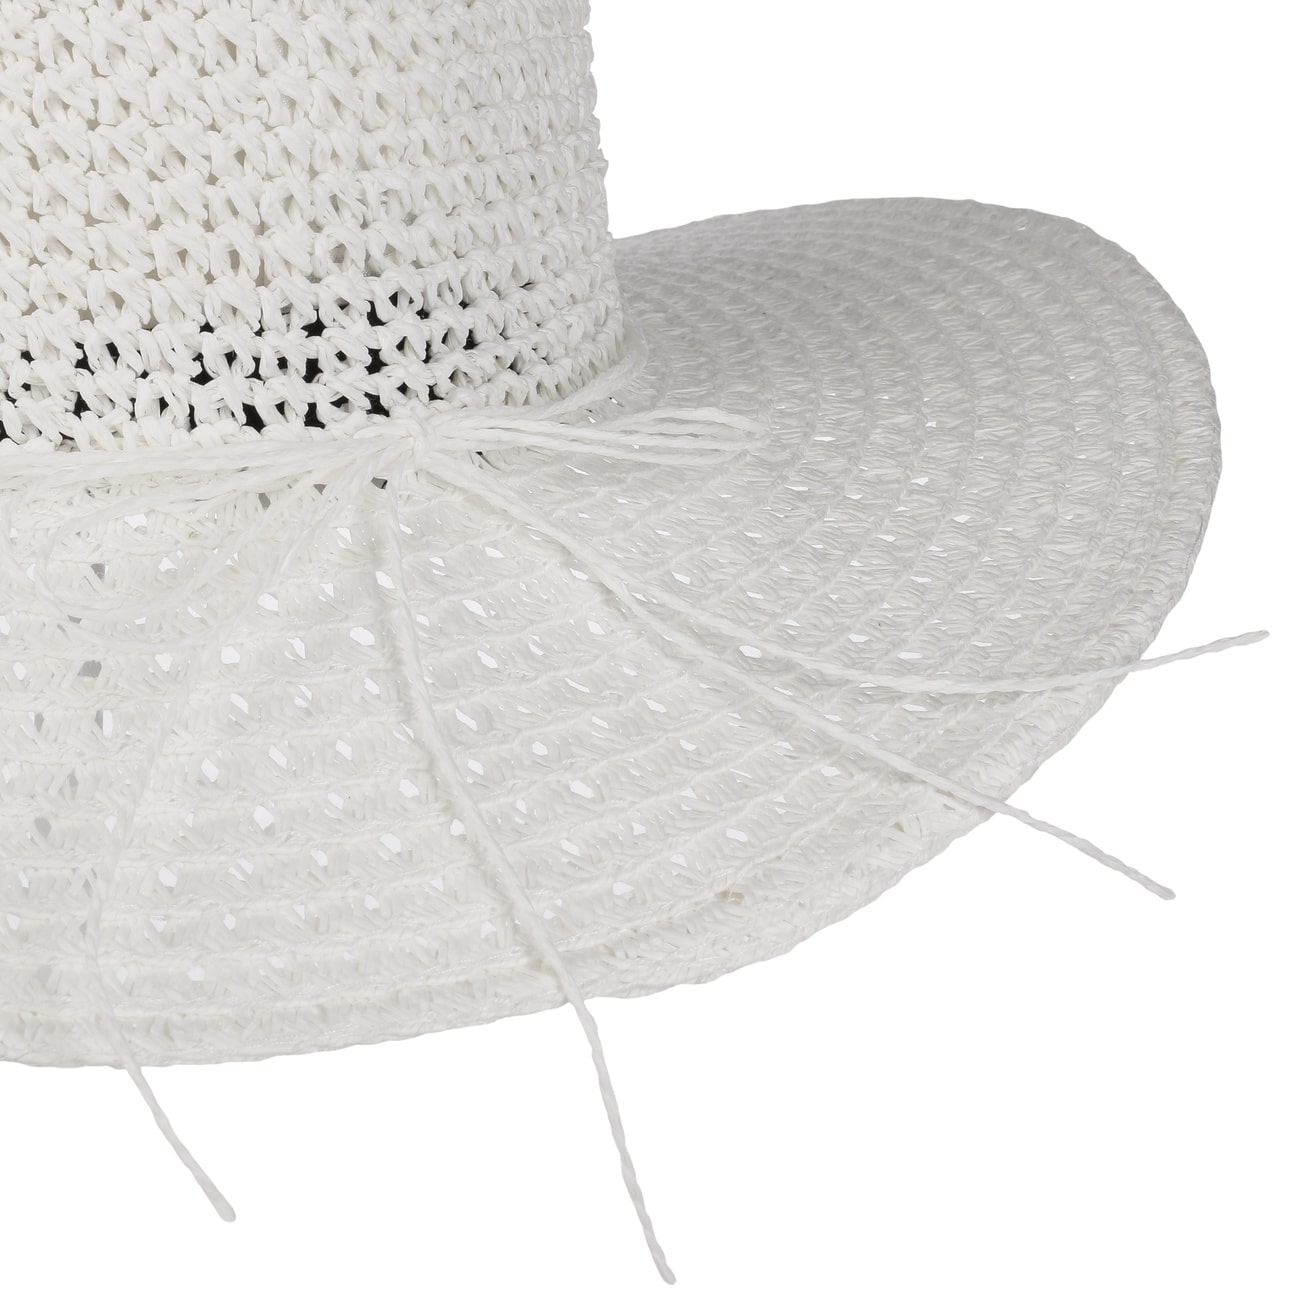 Levina Straw Hat by Seeberger --> Shop Hats, Beanies & Caps online ▷  Hatshopping